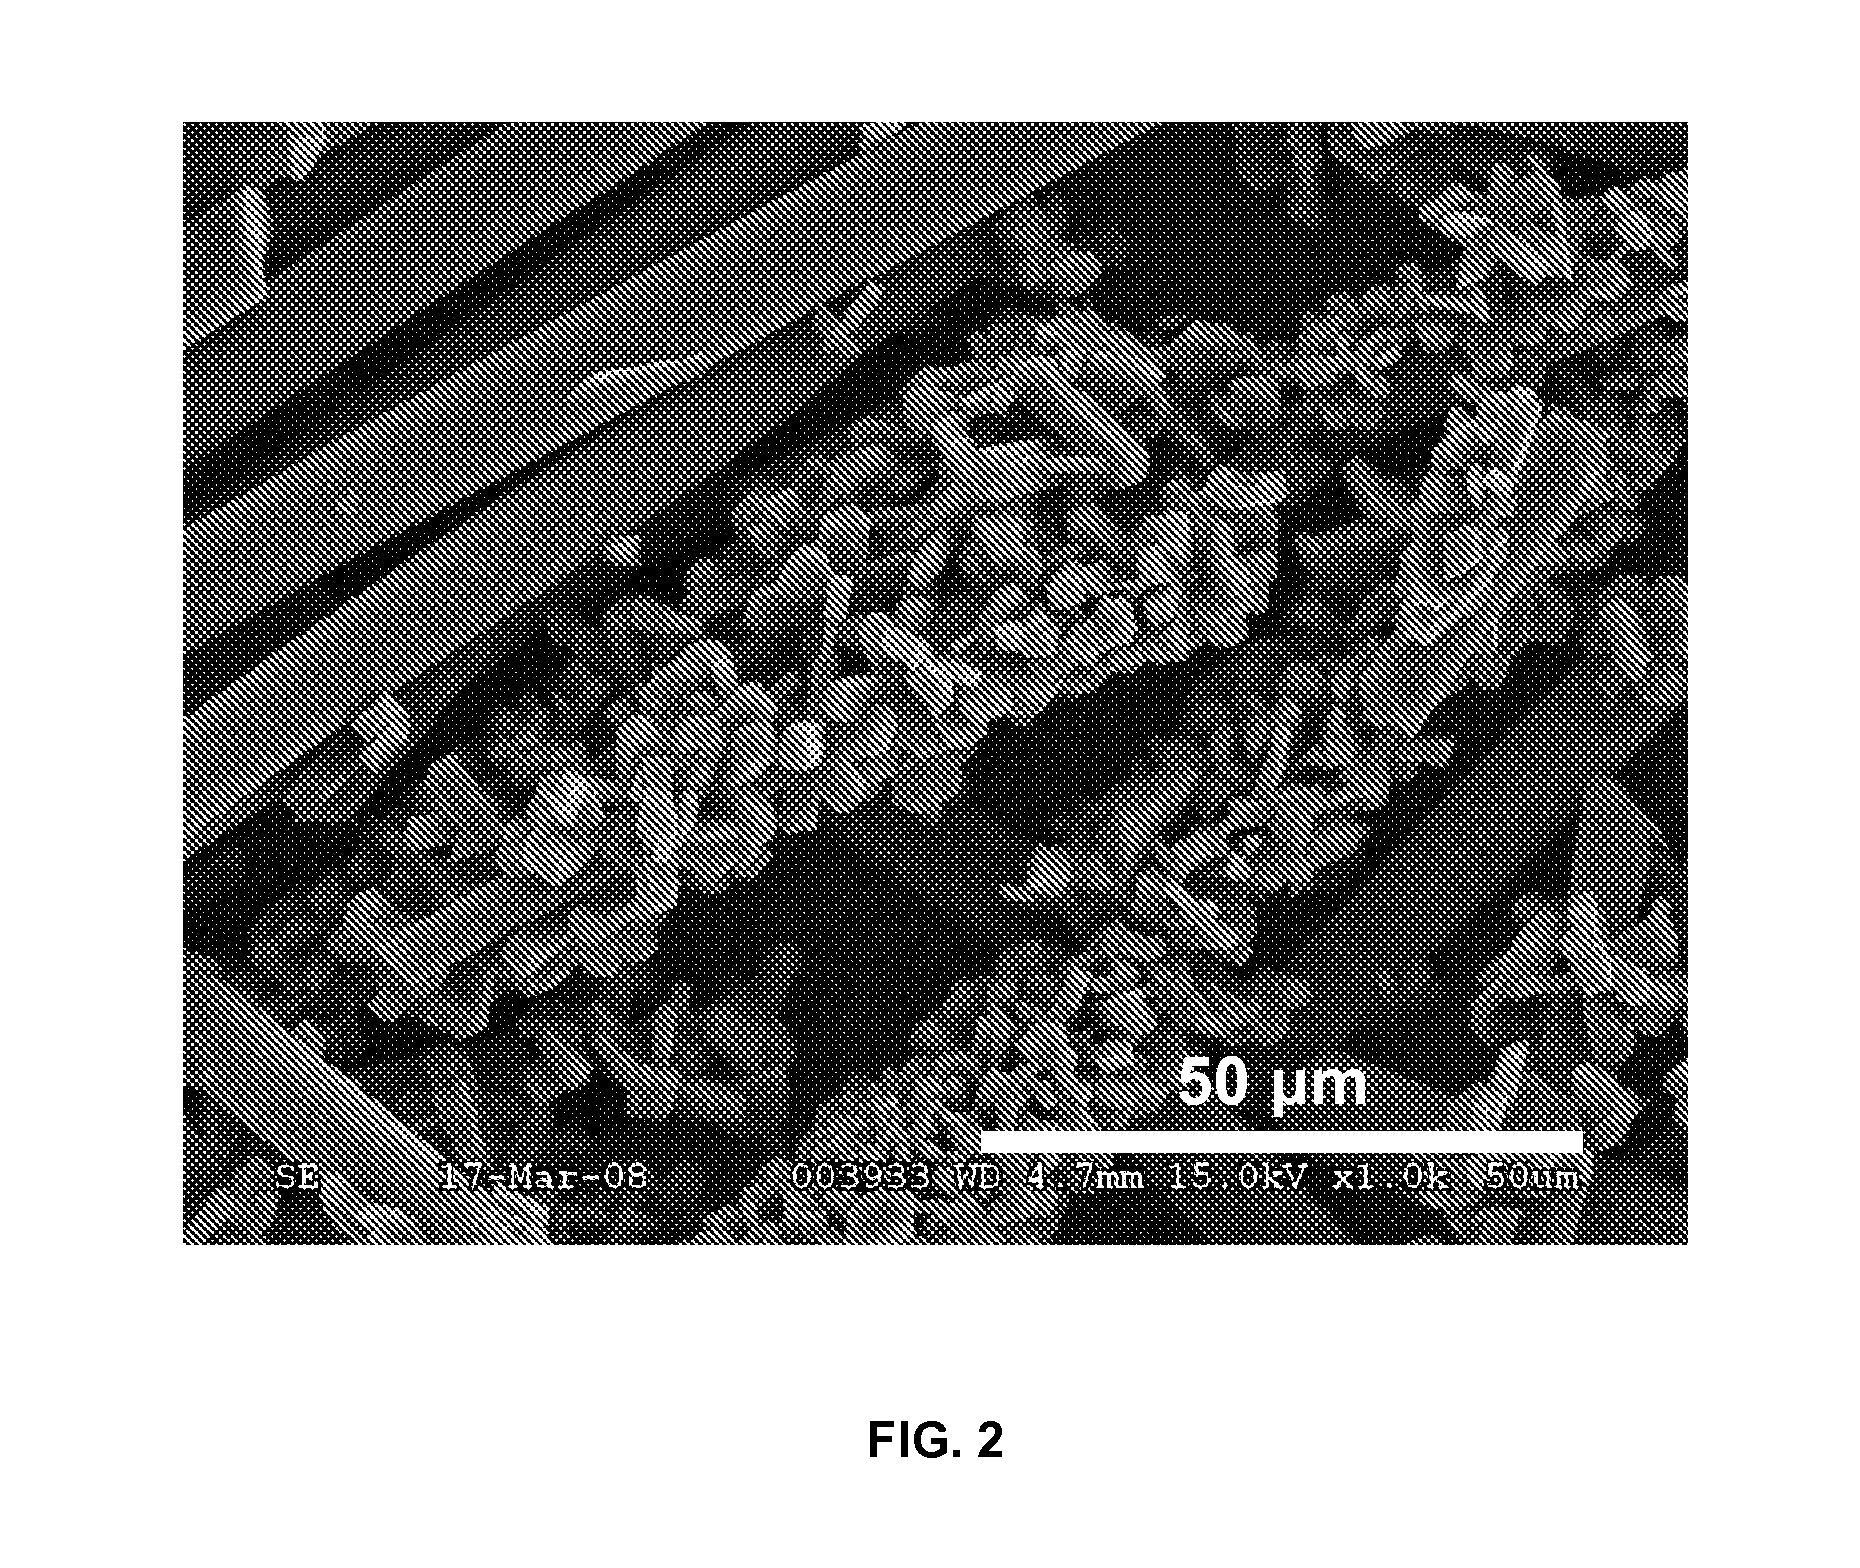 Fibrous substrate-based hydroprocessing catalysts and associated methods